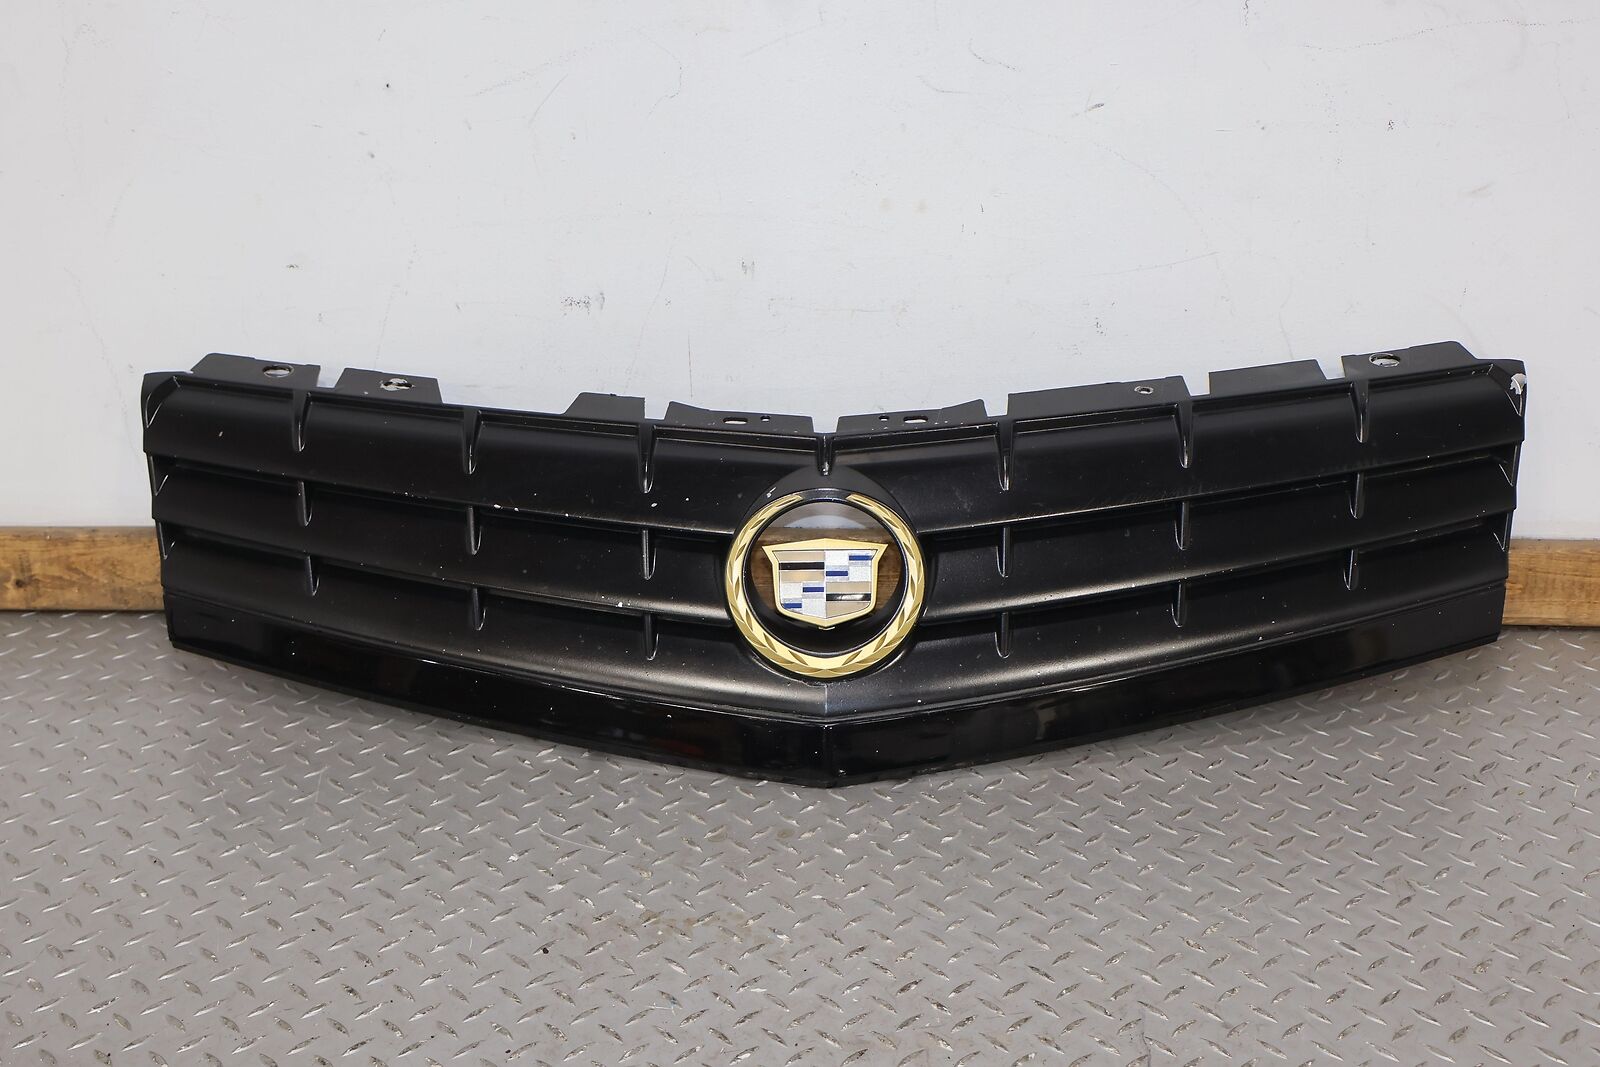 04-08 Cadillac XLR Front OEM Upper Silver Grille (Black Trim) Blemishes In Paint